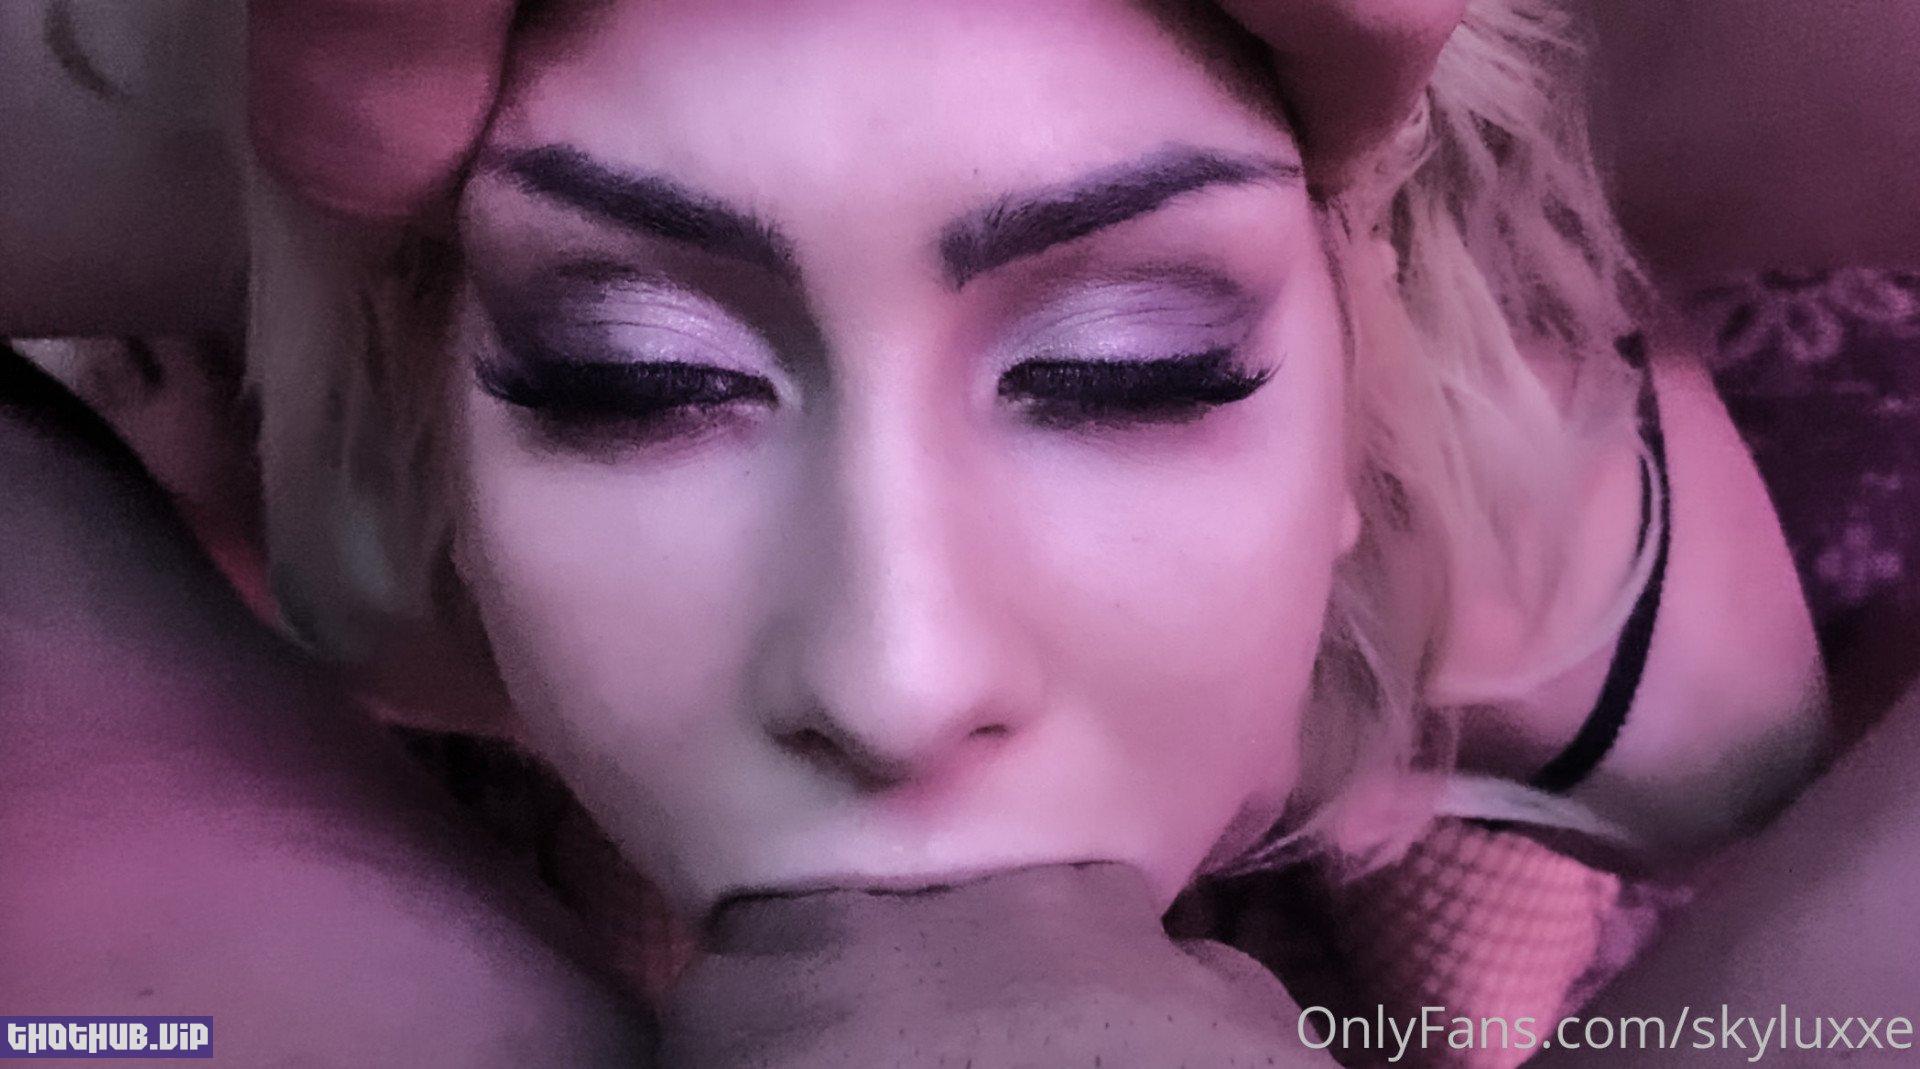 Sky Luxxe (skyluxxe) Onlyfans Leaks (144 images)